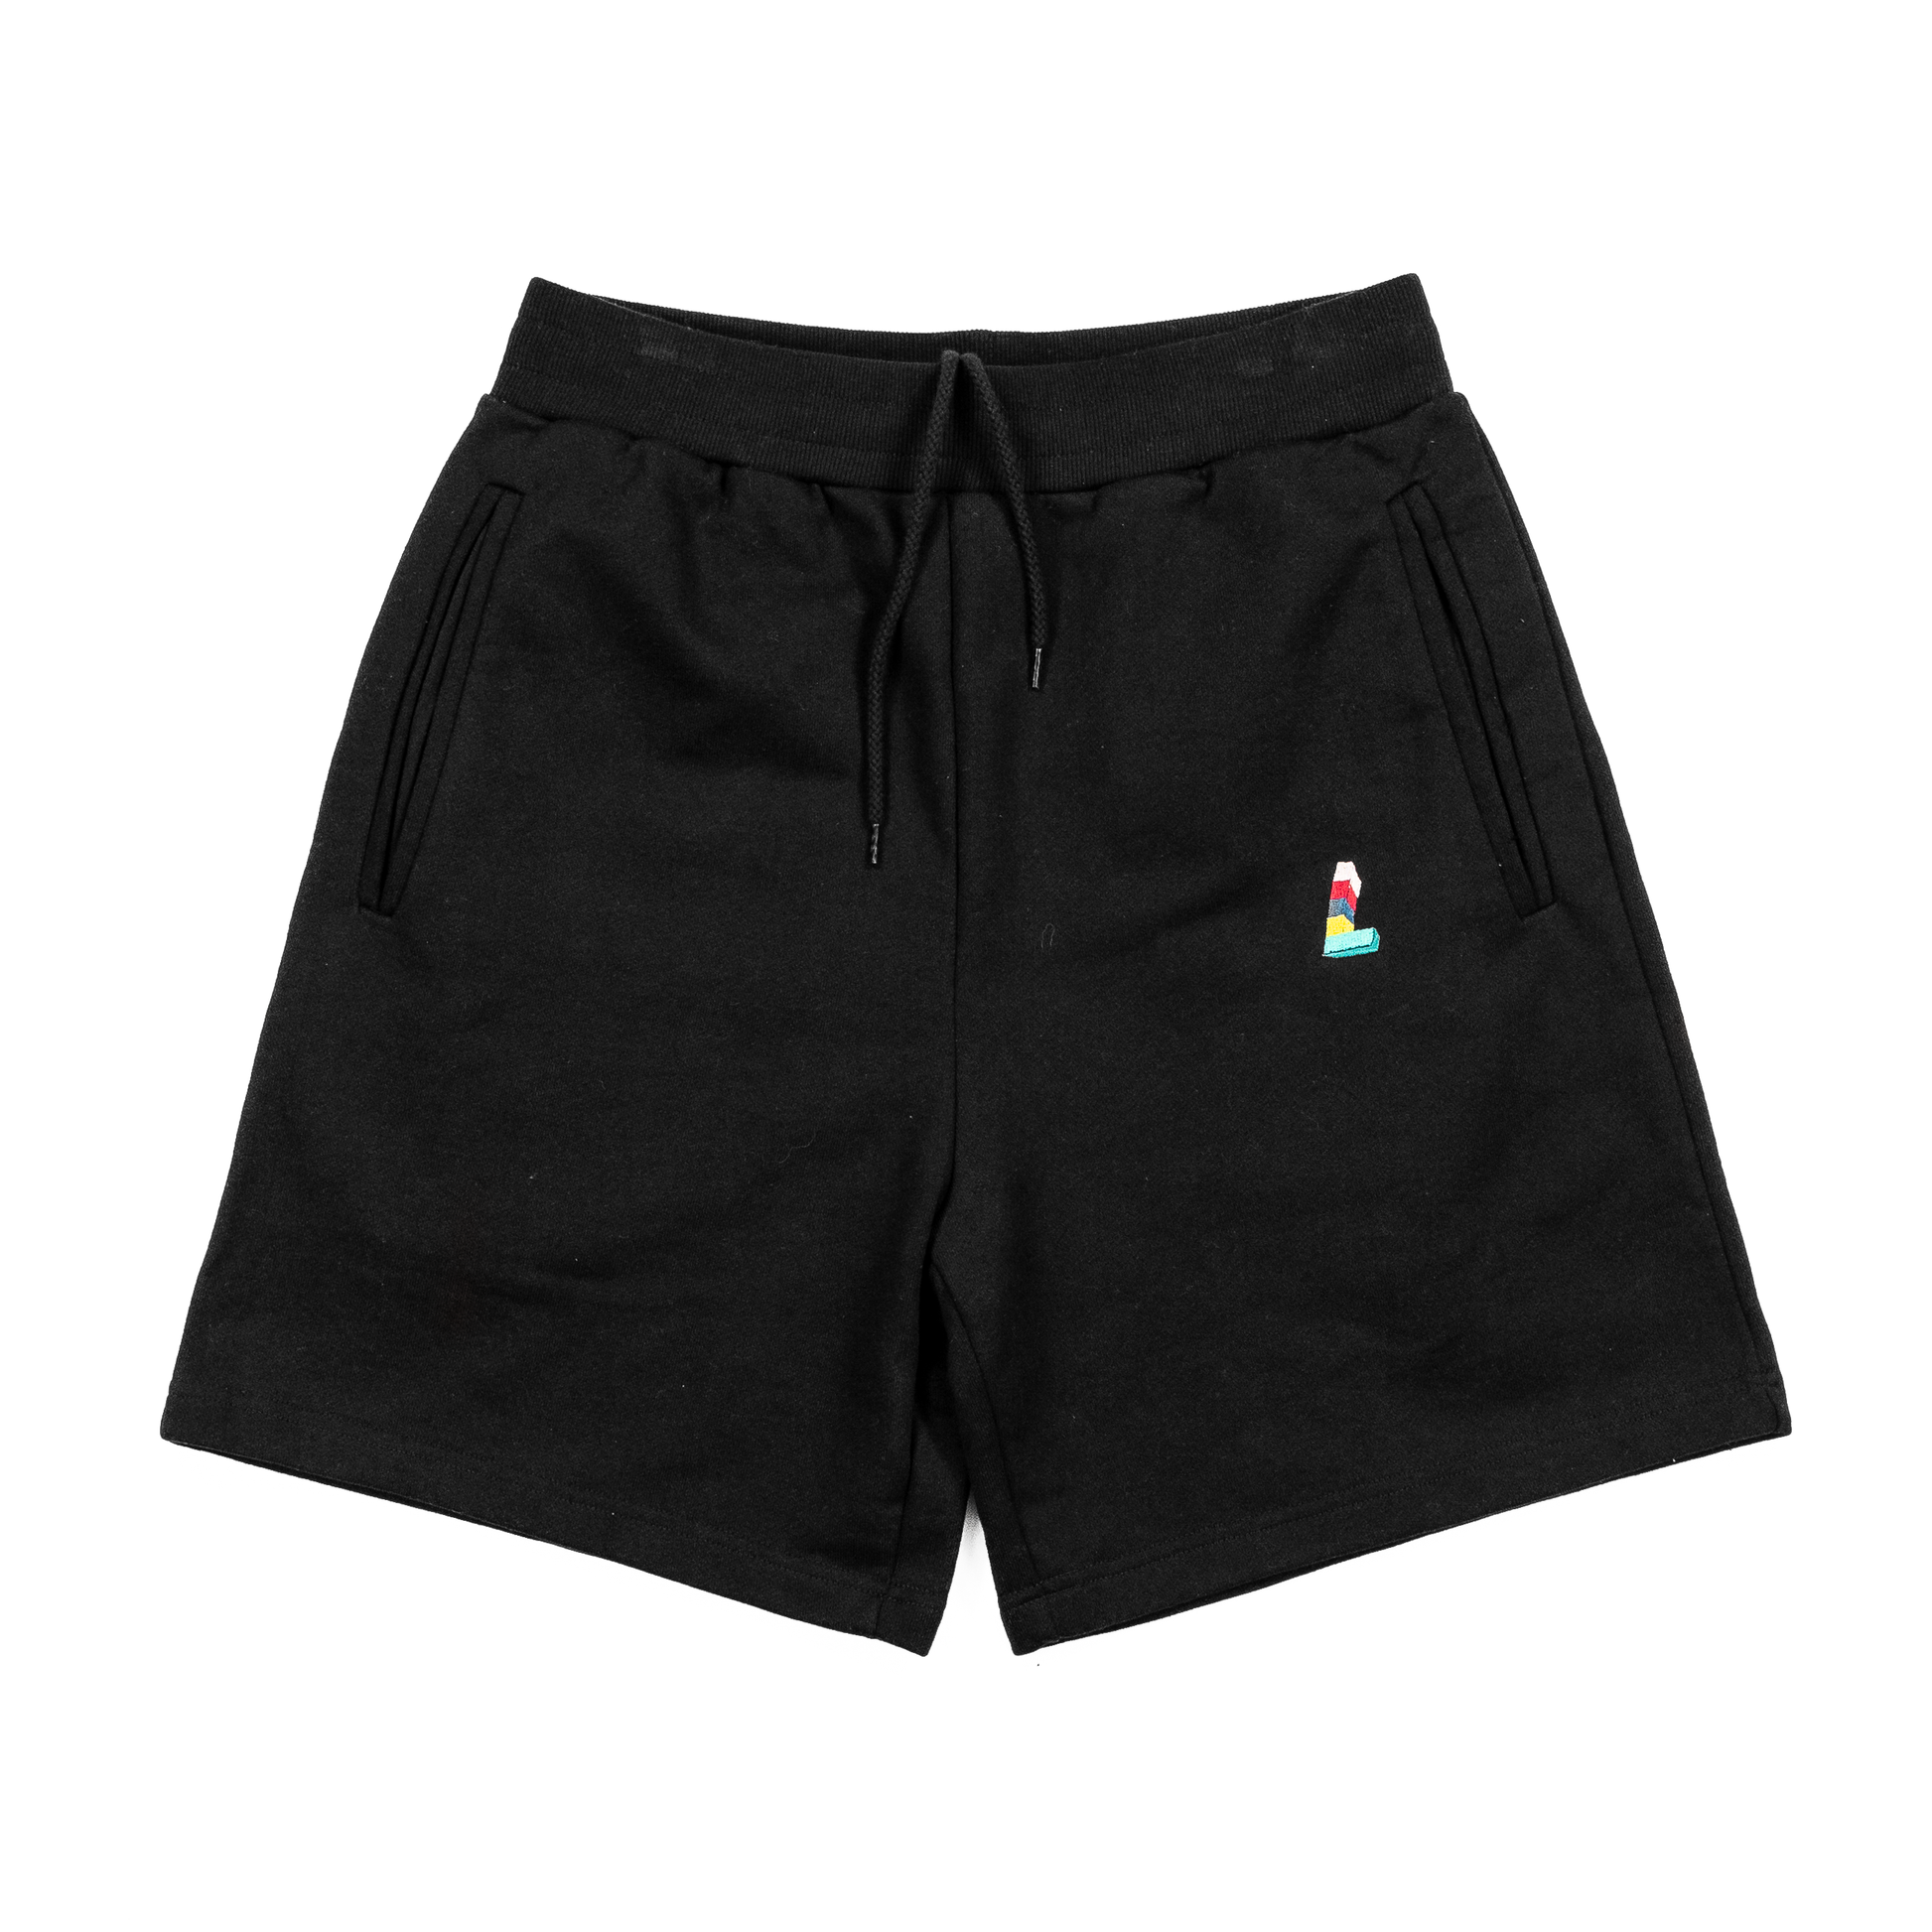 Luxury Essential Shorts, Black - Layr Official